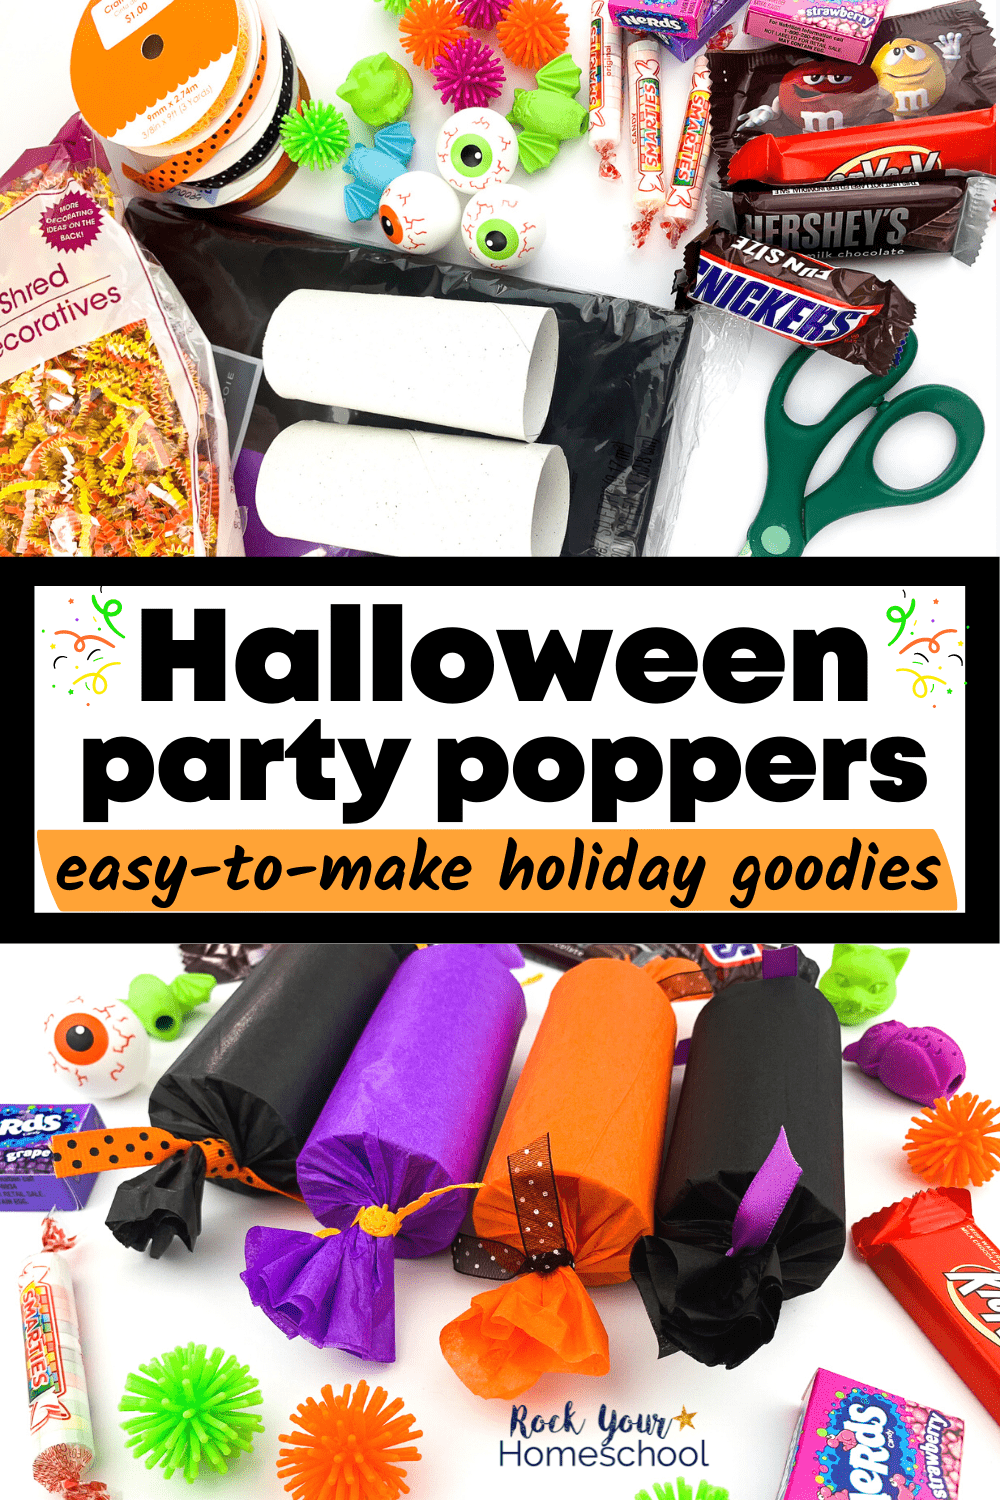 Halloween Party Poppers: How to Make & Enjoy These Simple Fun Treats